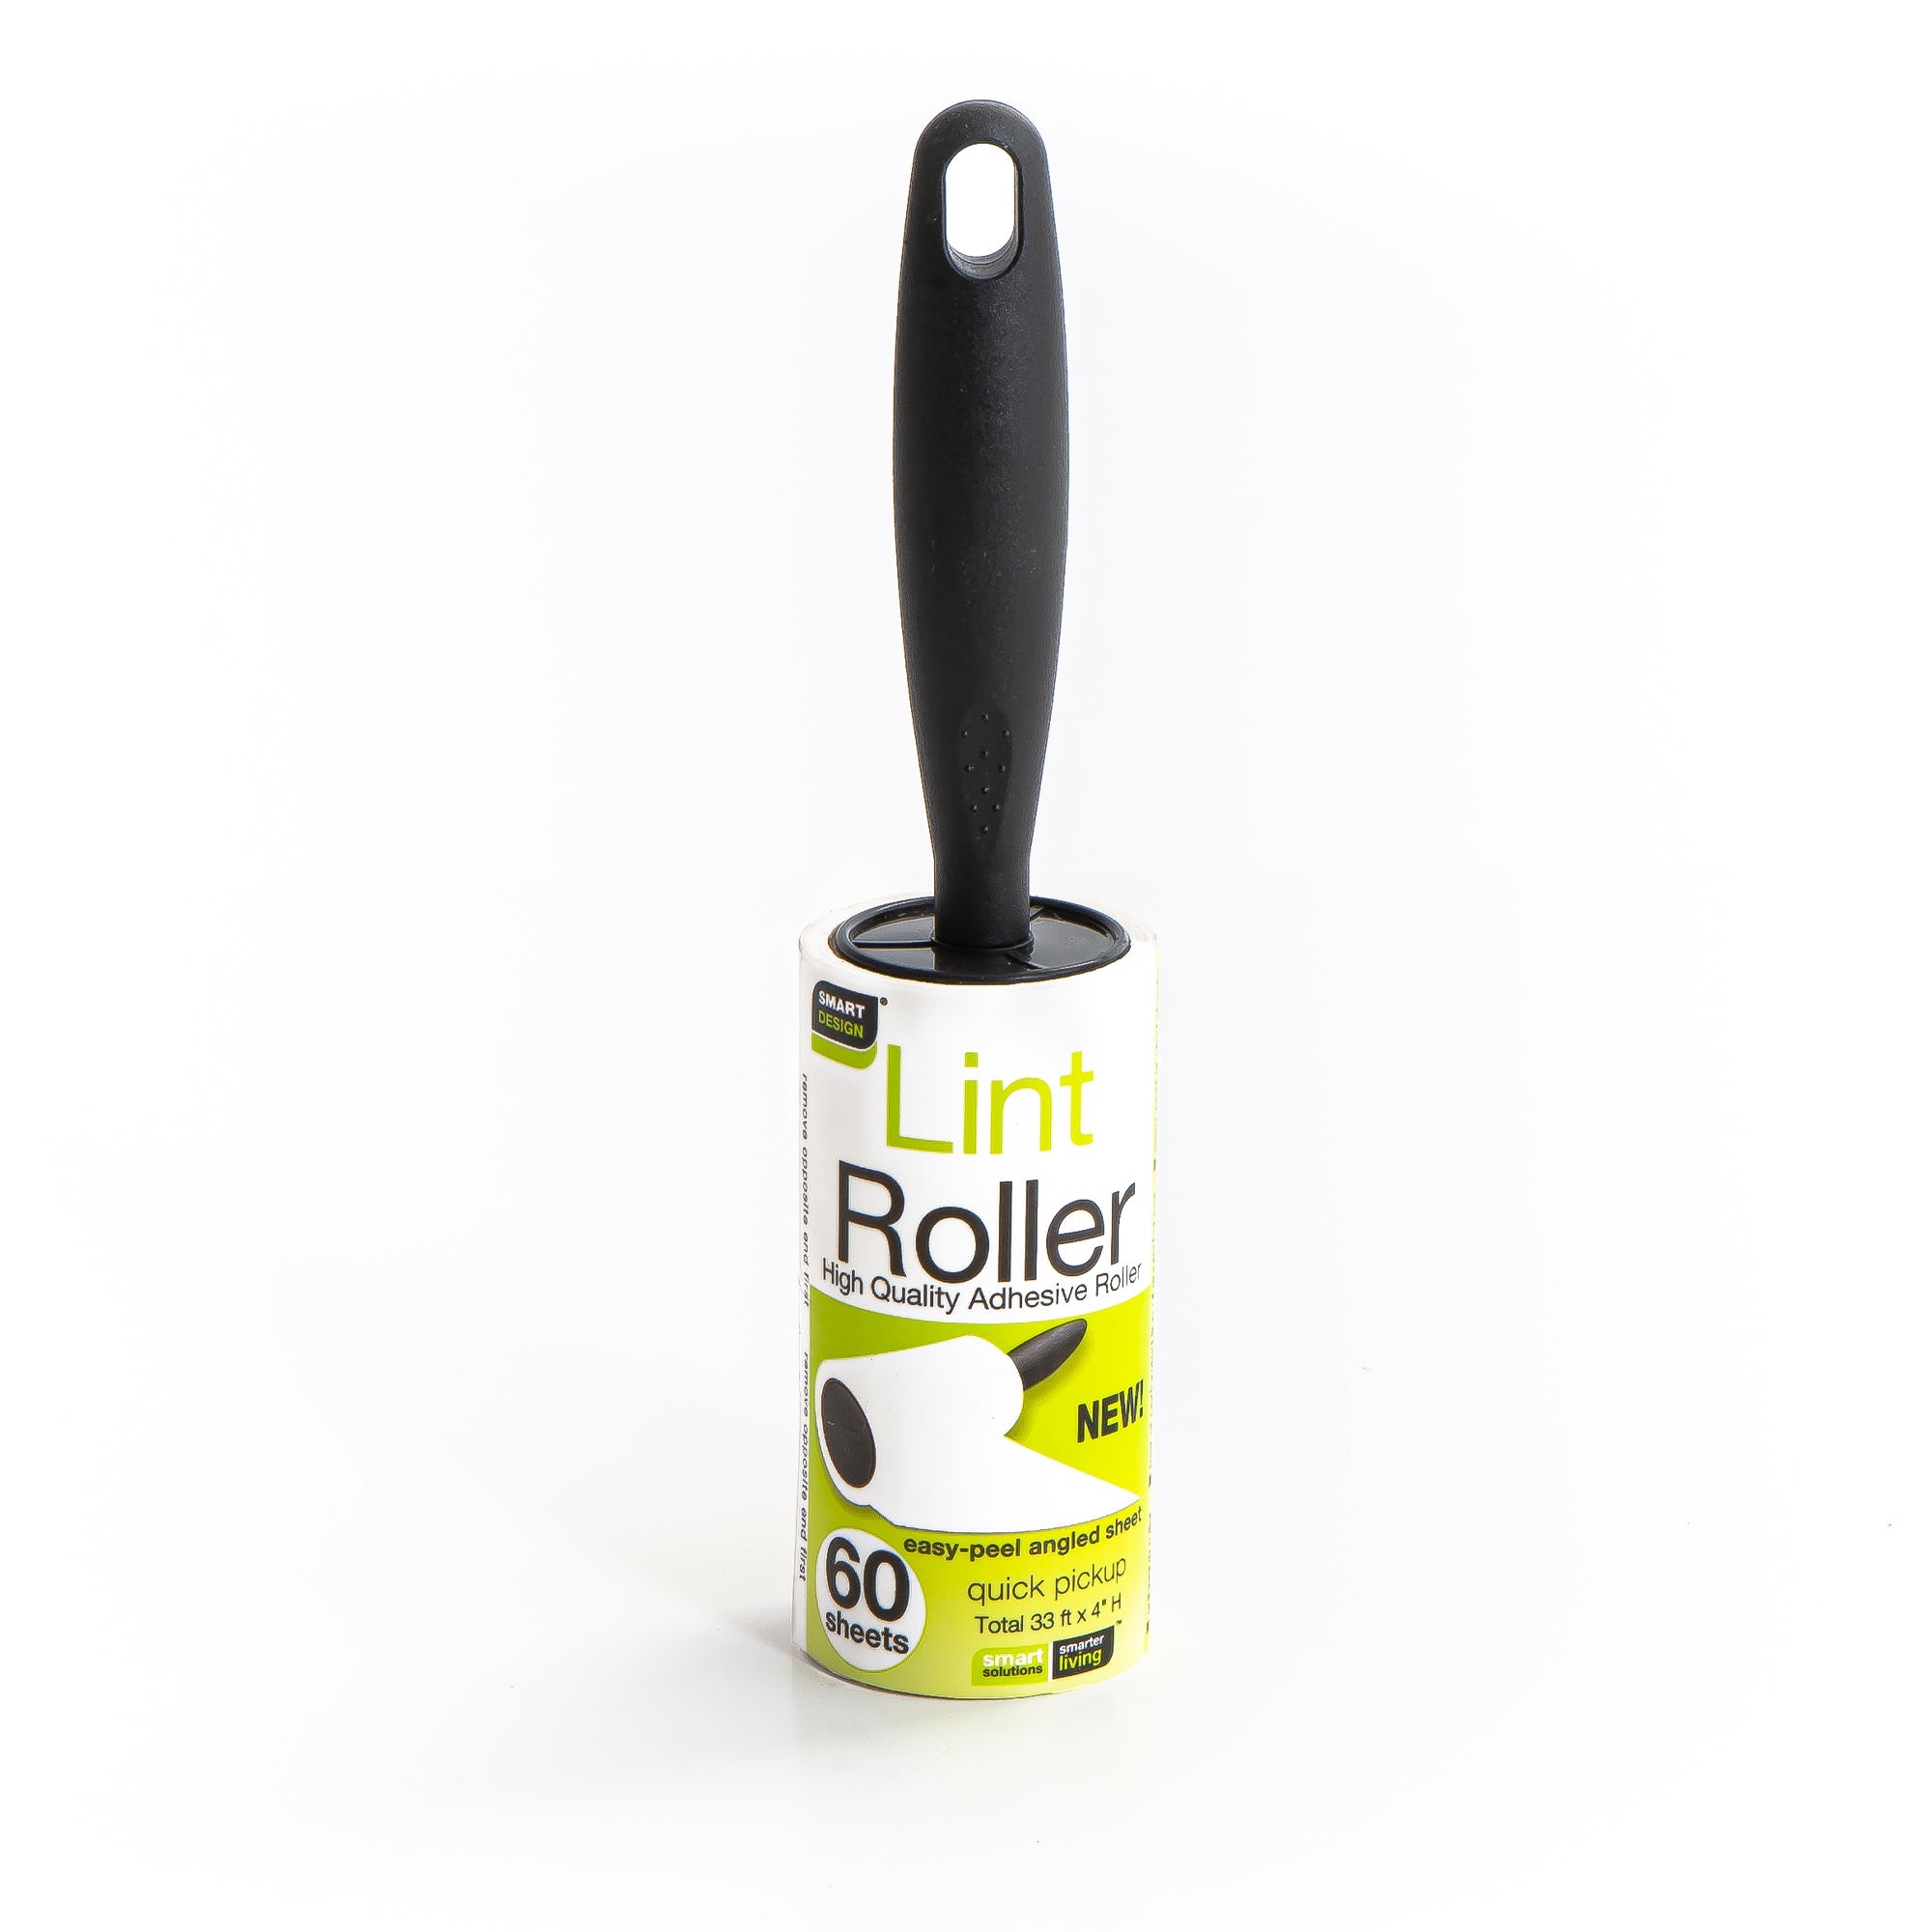 Lint Roller with Ergonomic Grip Handle and 60 Easy-Peel Sheets - Smart Design® 1